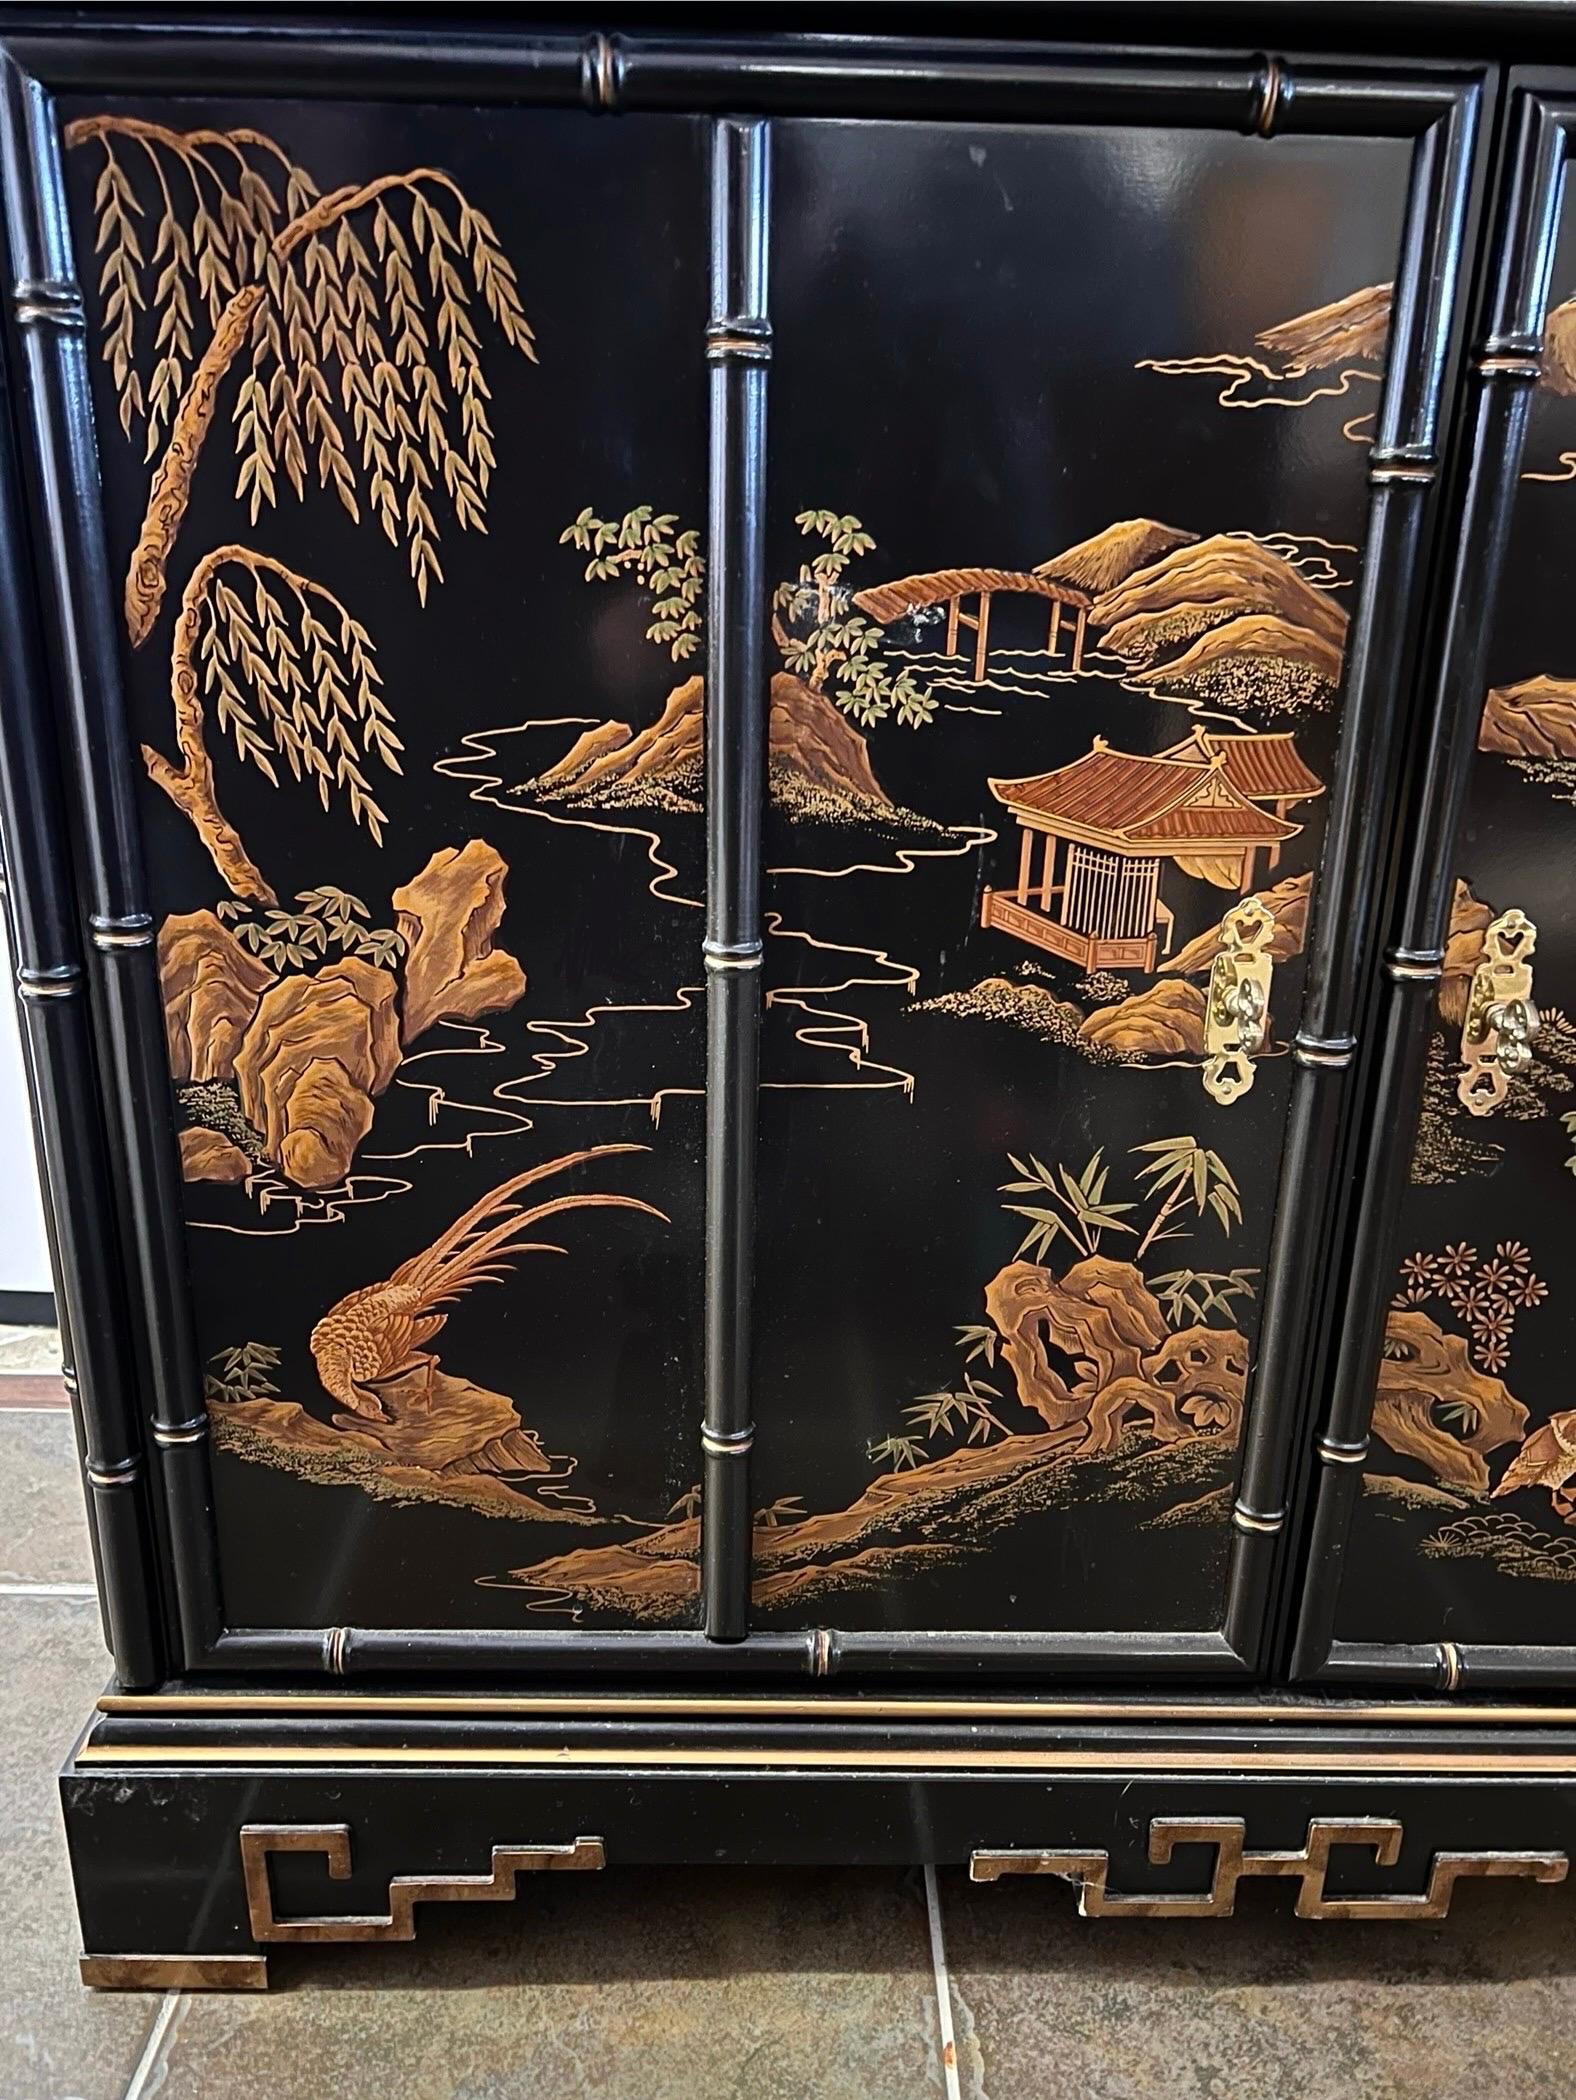 Stunning and breathtaking black lacquered chinoiserie style armoire that features a gold pagoda with faux bamboo accent detail all around.  It alos features hand painted landscape scenery by skilled artisans throughout.
The top portion has two